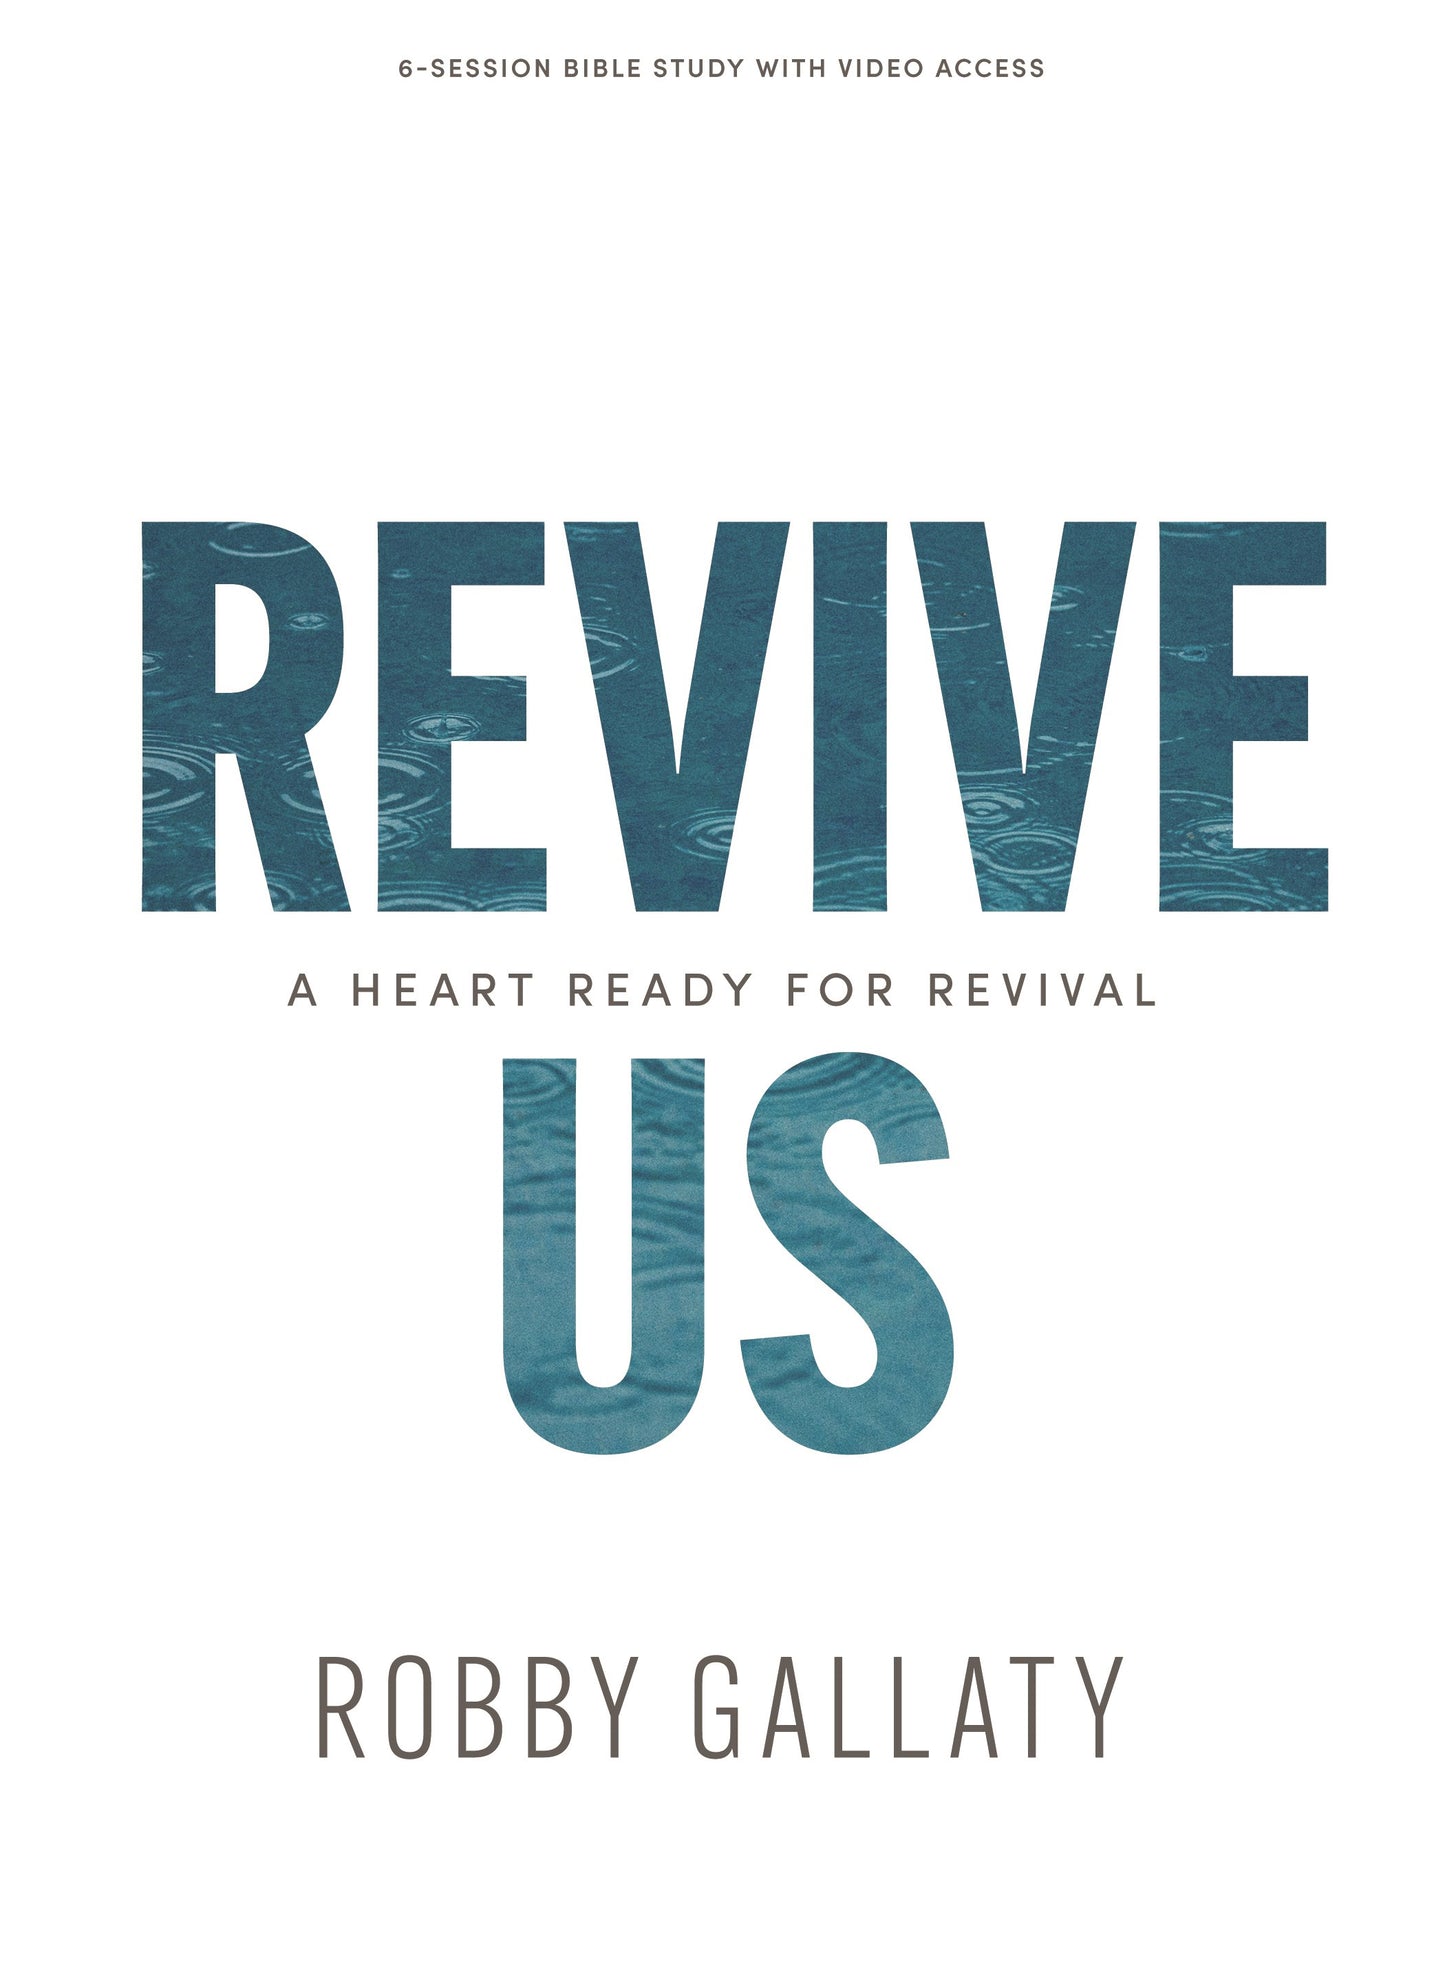 Revive Us Bible Study Book With Video Access